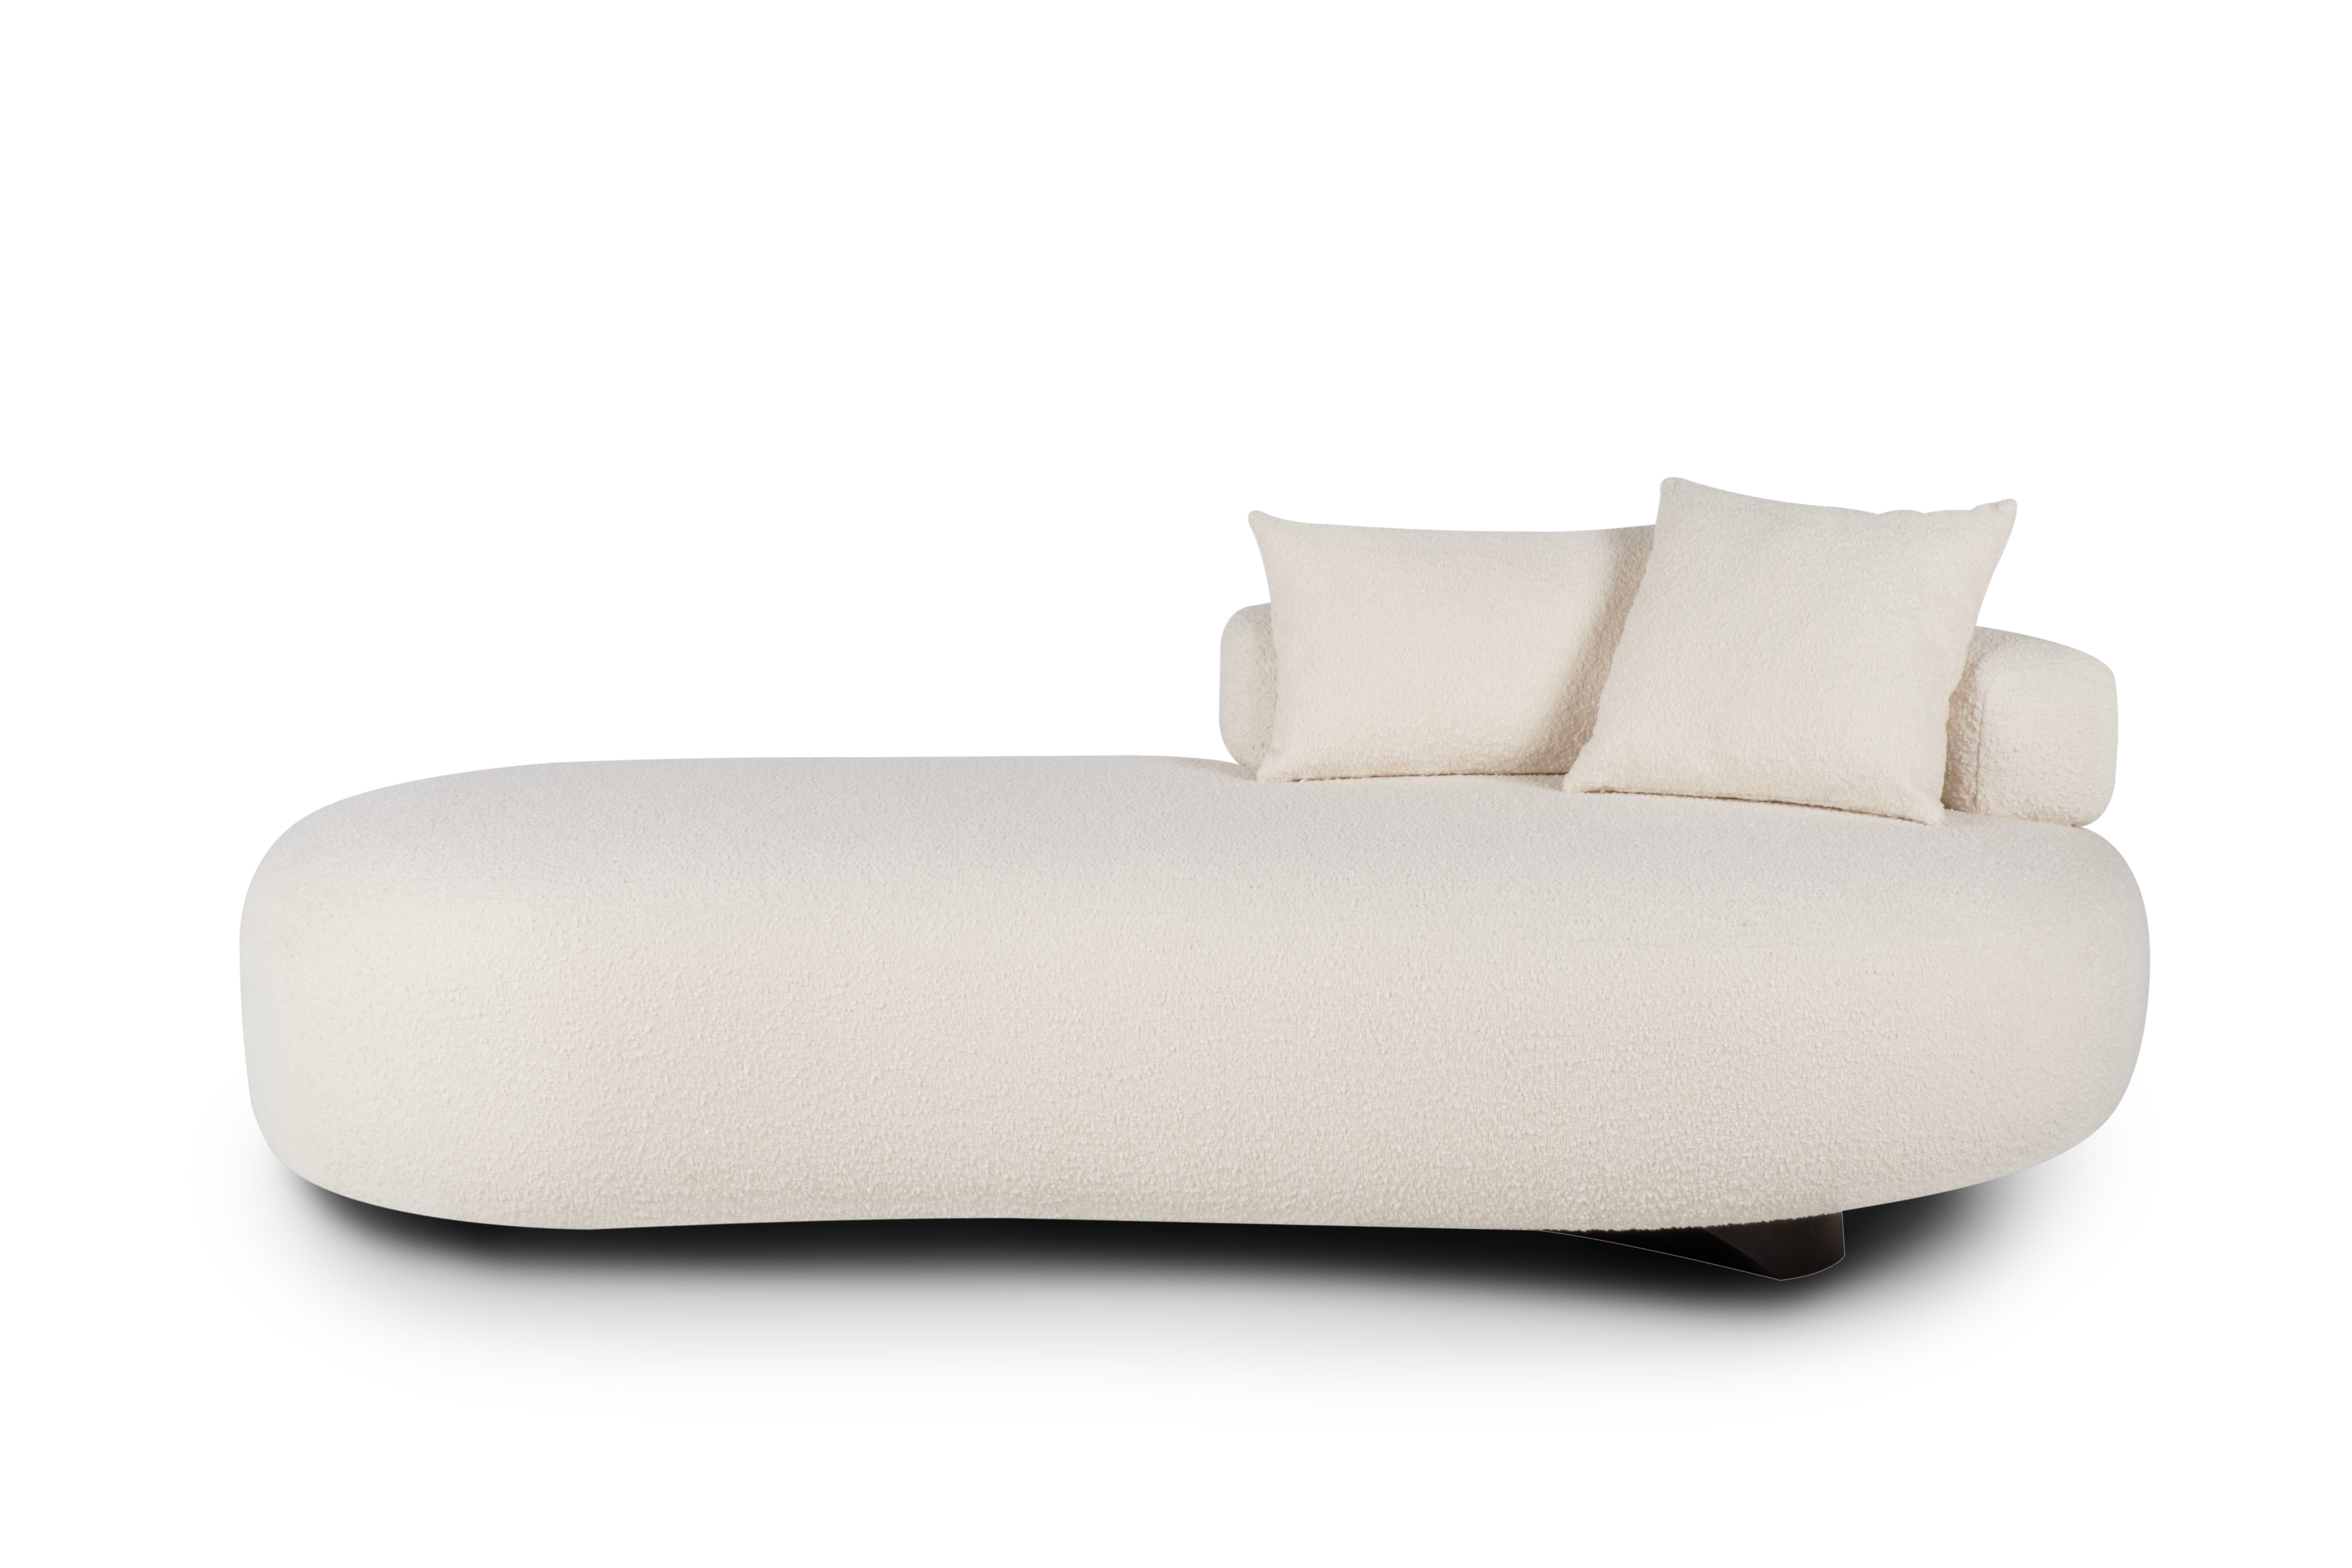 Modern Twins Day Bed, White Woven Bouclé, Handmade in Portugal by Greenapple